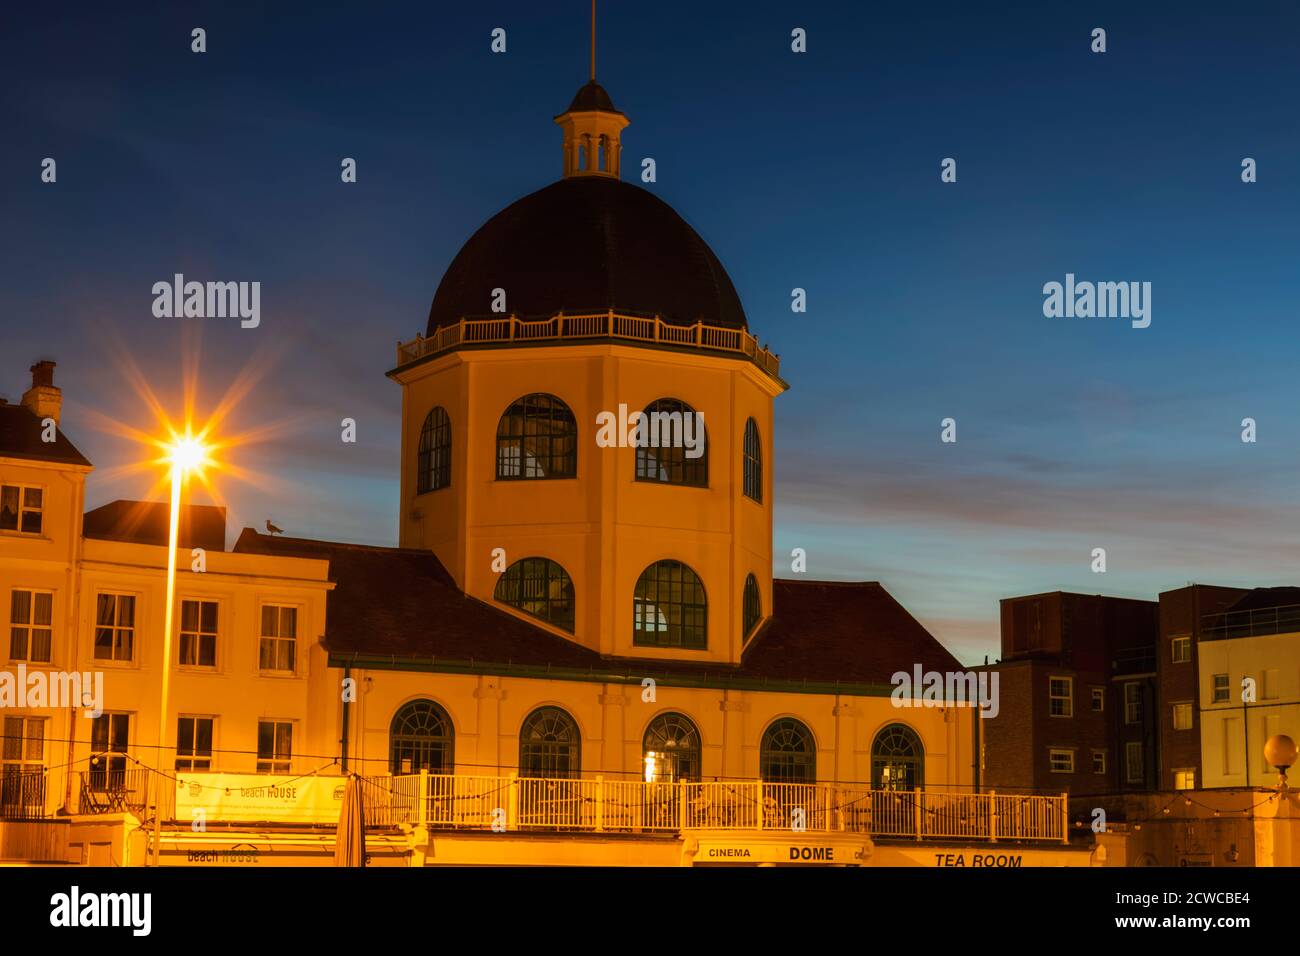 England, West Sussex, Worthing, The Art Deco Dome Cinema and Tea Room Building Stock Photo